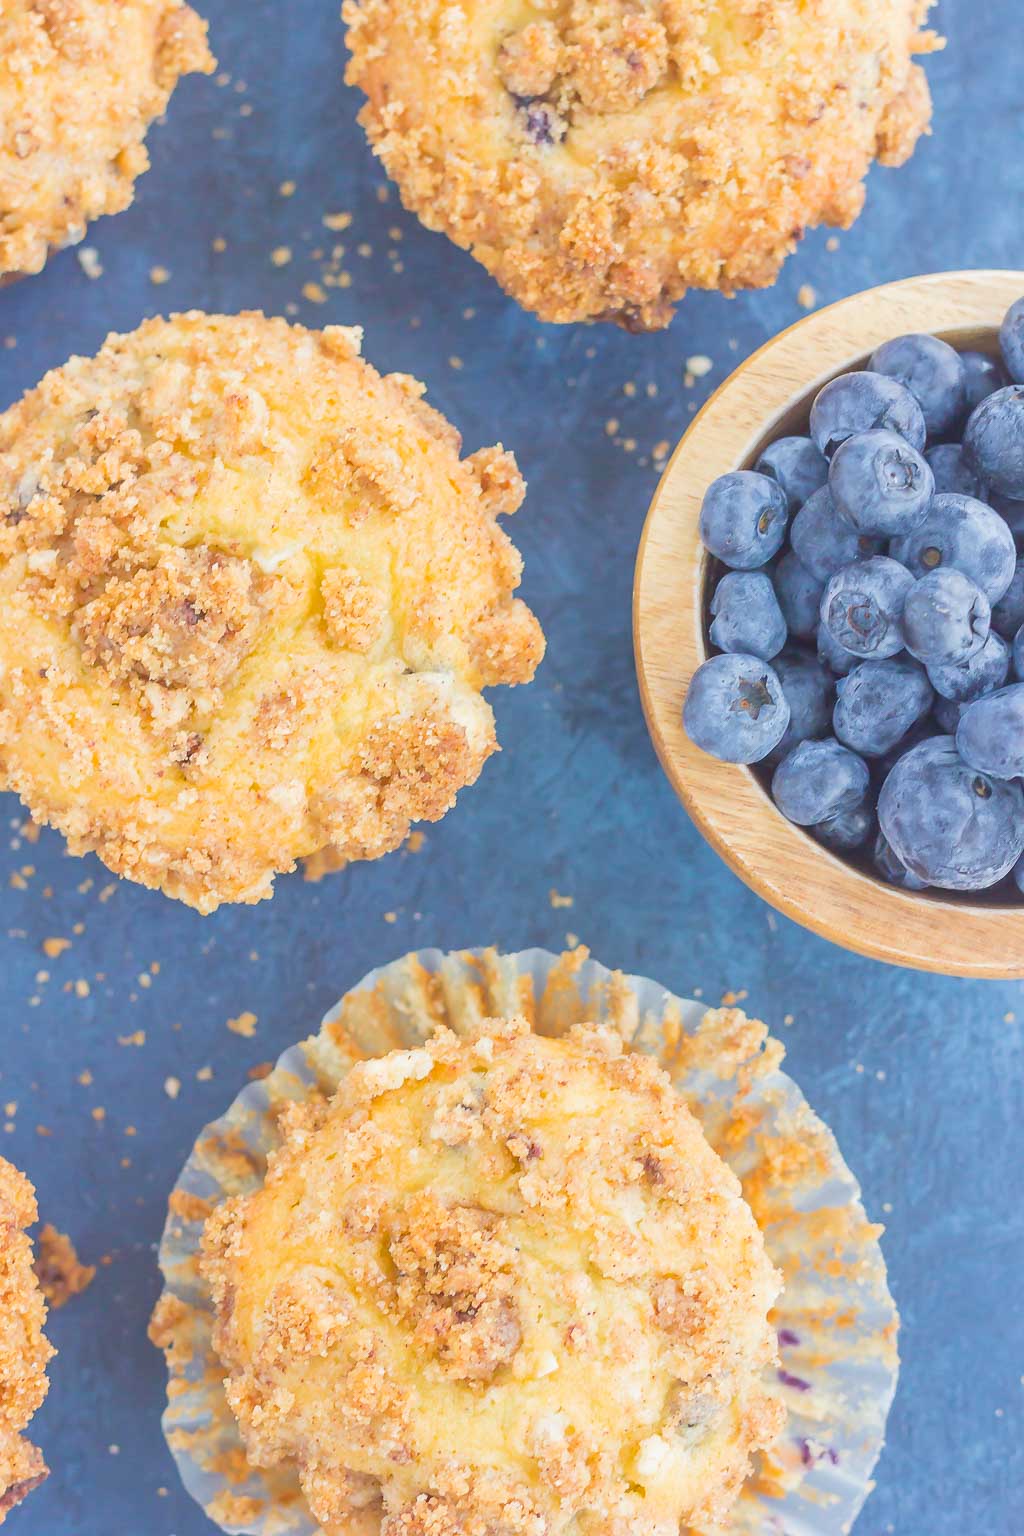 These Blueberry Cheesecake Muffins make a delicious breakfast or easy dessert. Filled with tangy blueberries, a sweet cheesecake filling and topped with a buttery streusel, these muffins will quickly become everyone's favorite treat!